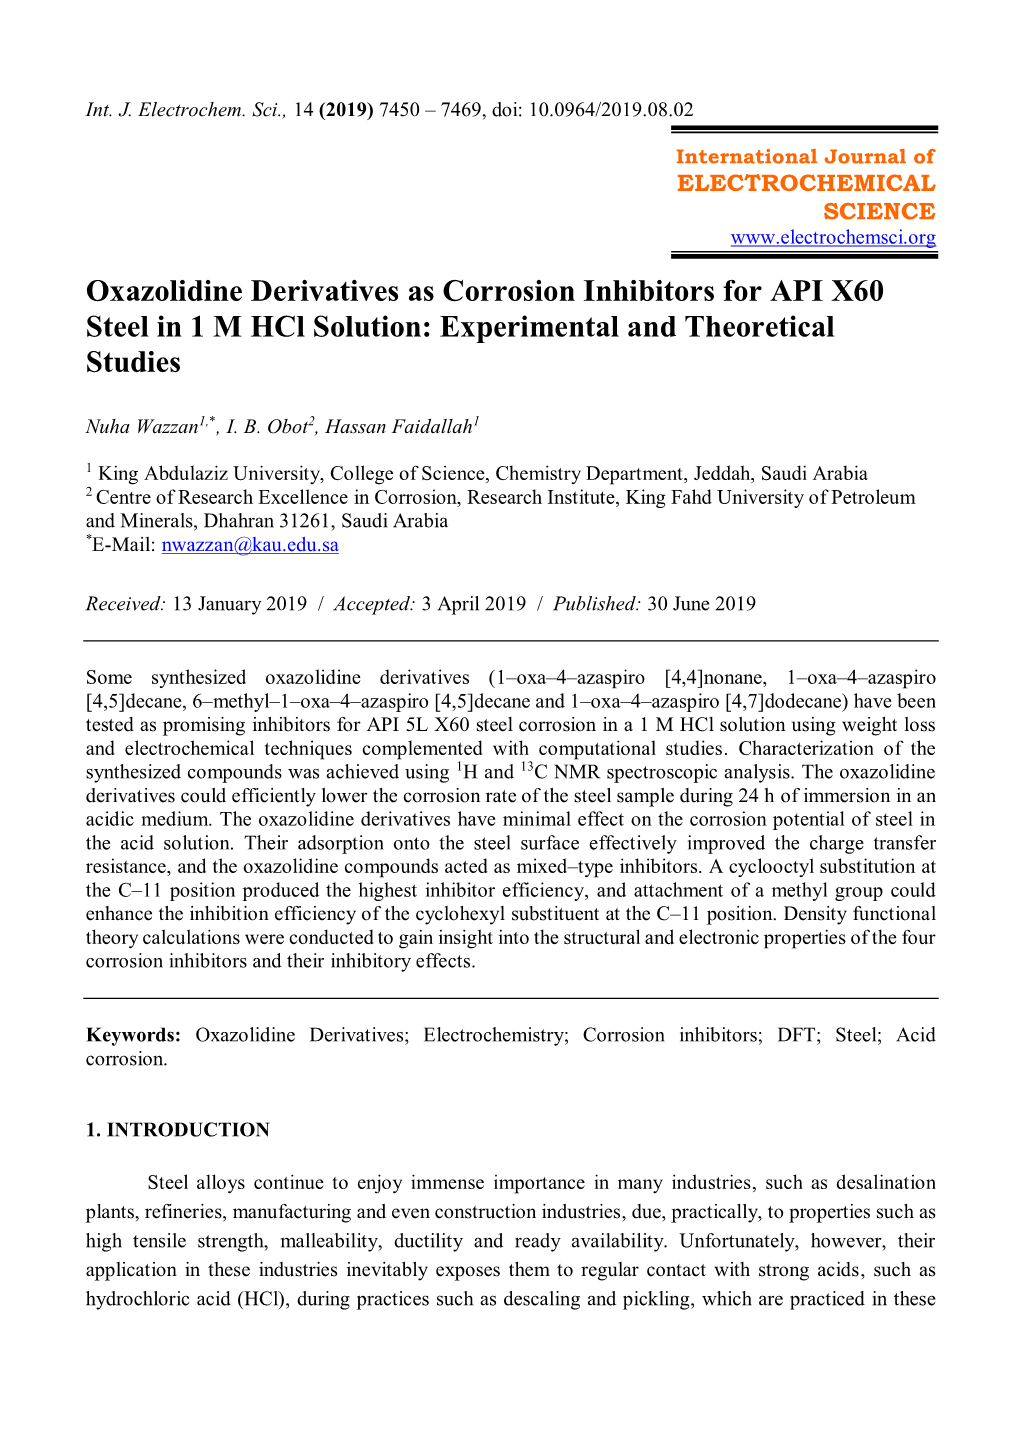 Oxazolidine Derivatives As Corrosion Inhibitors for API X60 Steel in 1 M Hcl Solution: Experimental and Theoretical Studies